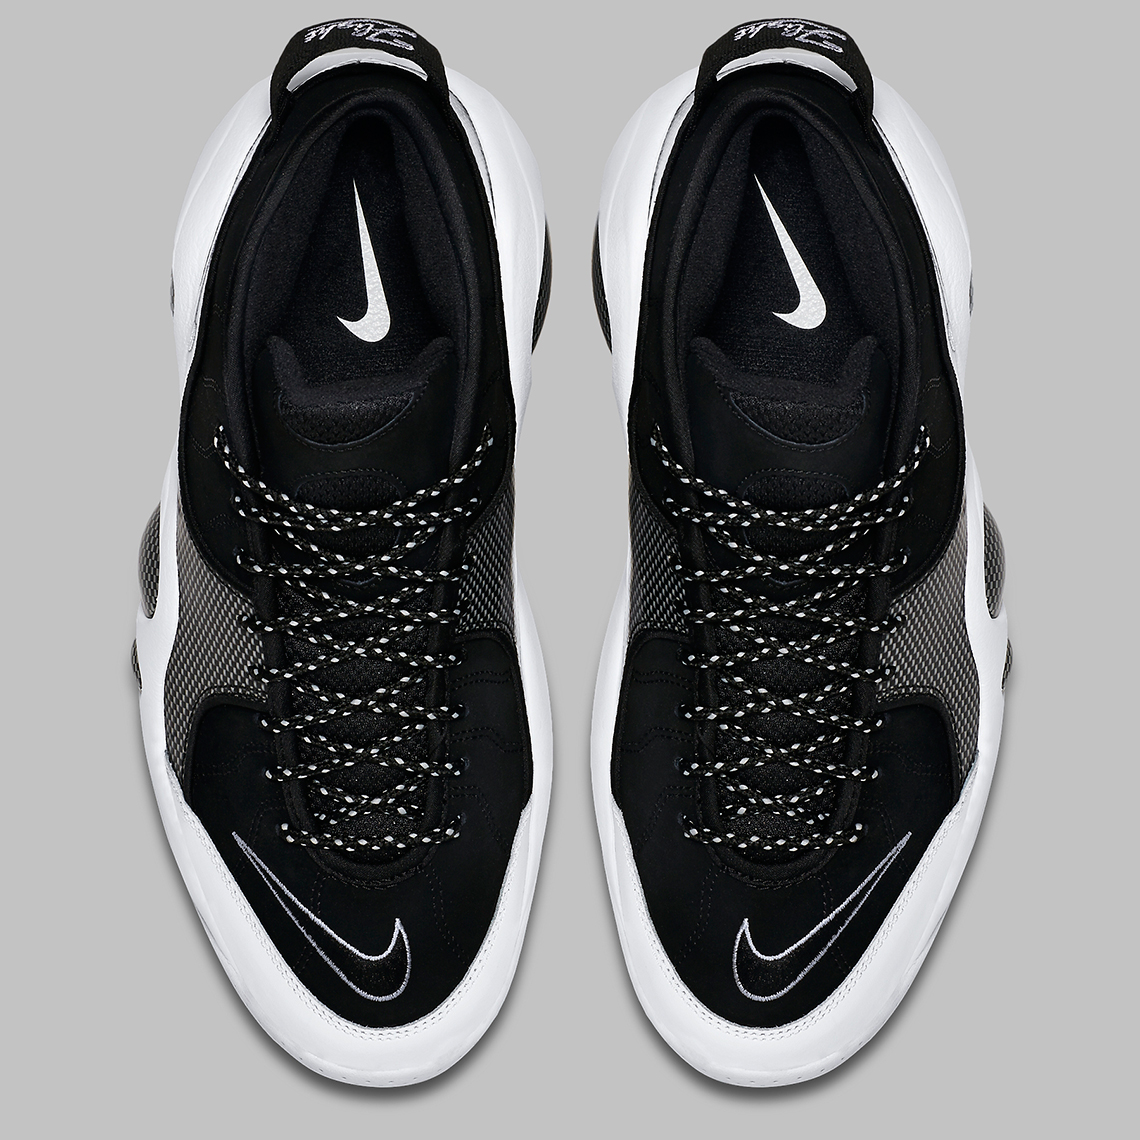 Nike authorized nike wholesale suppliers Og Black White 2022 Release Date 1